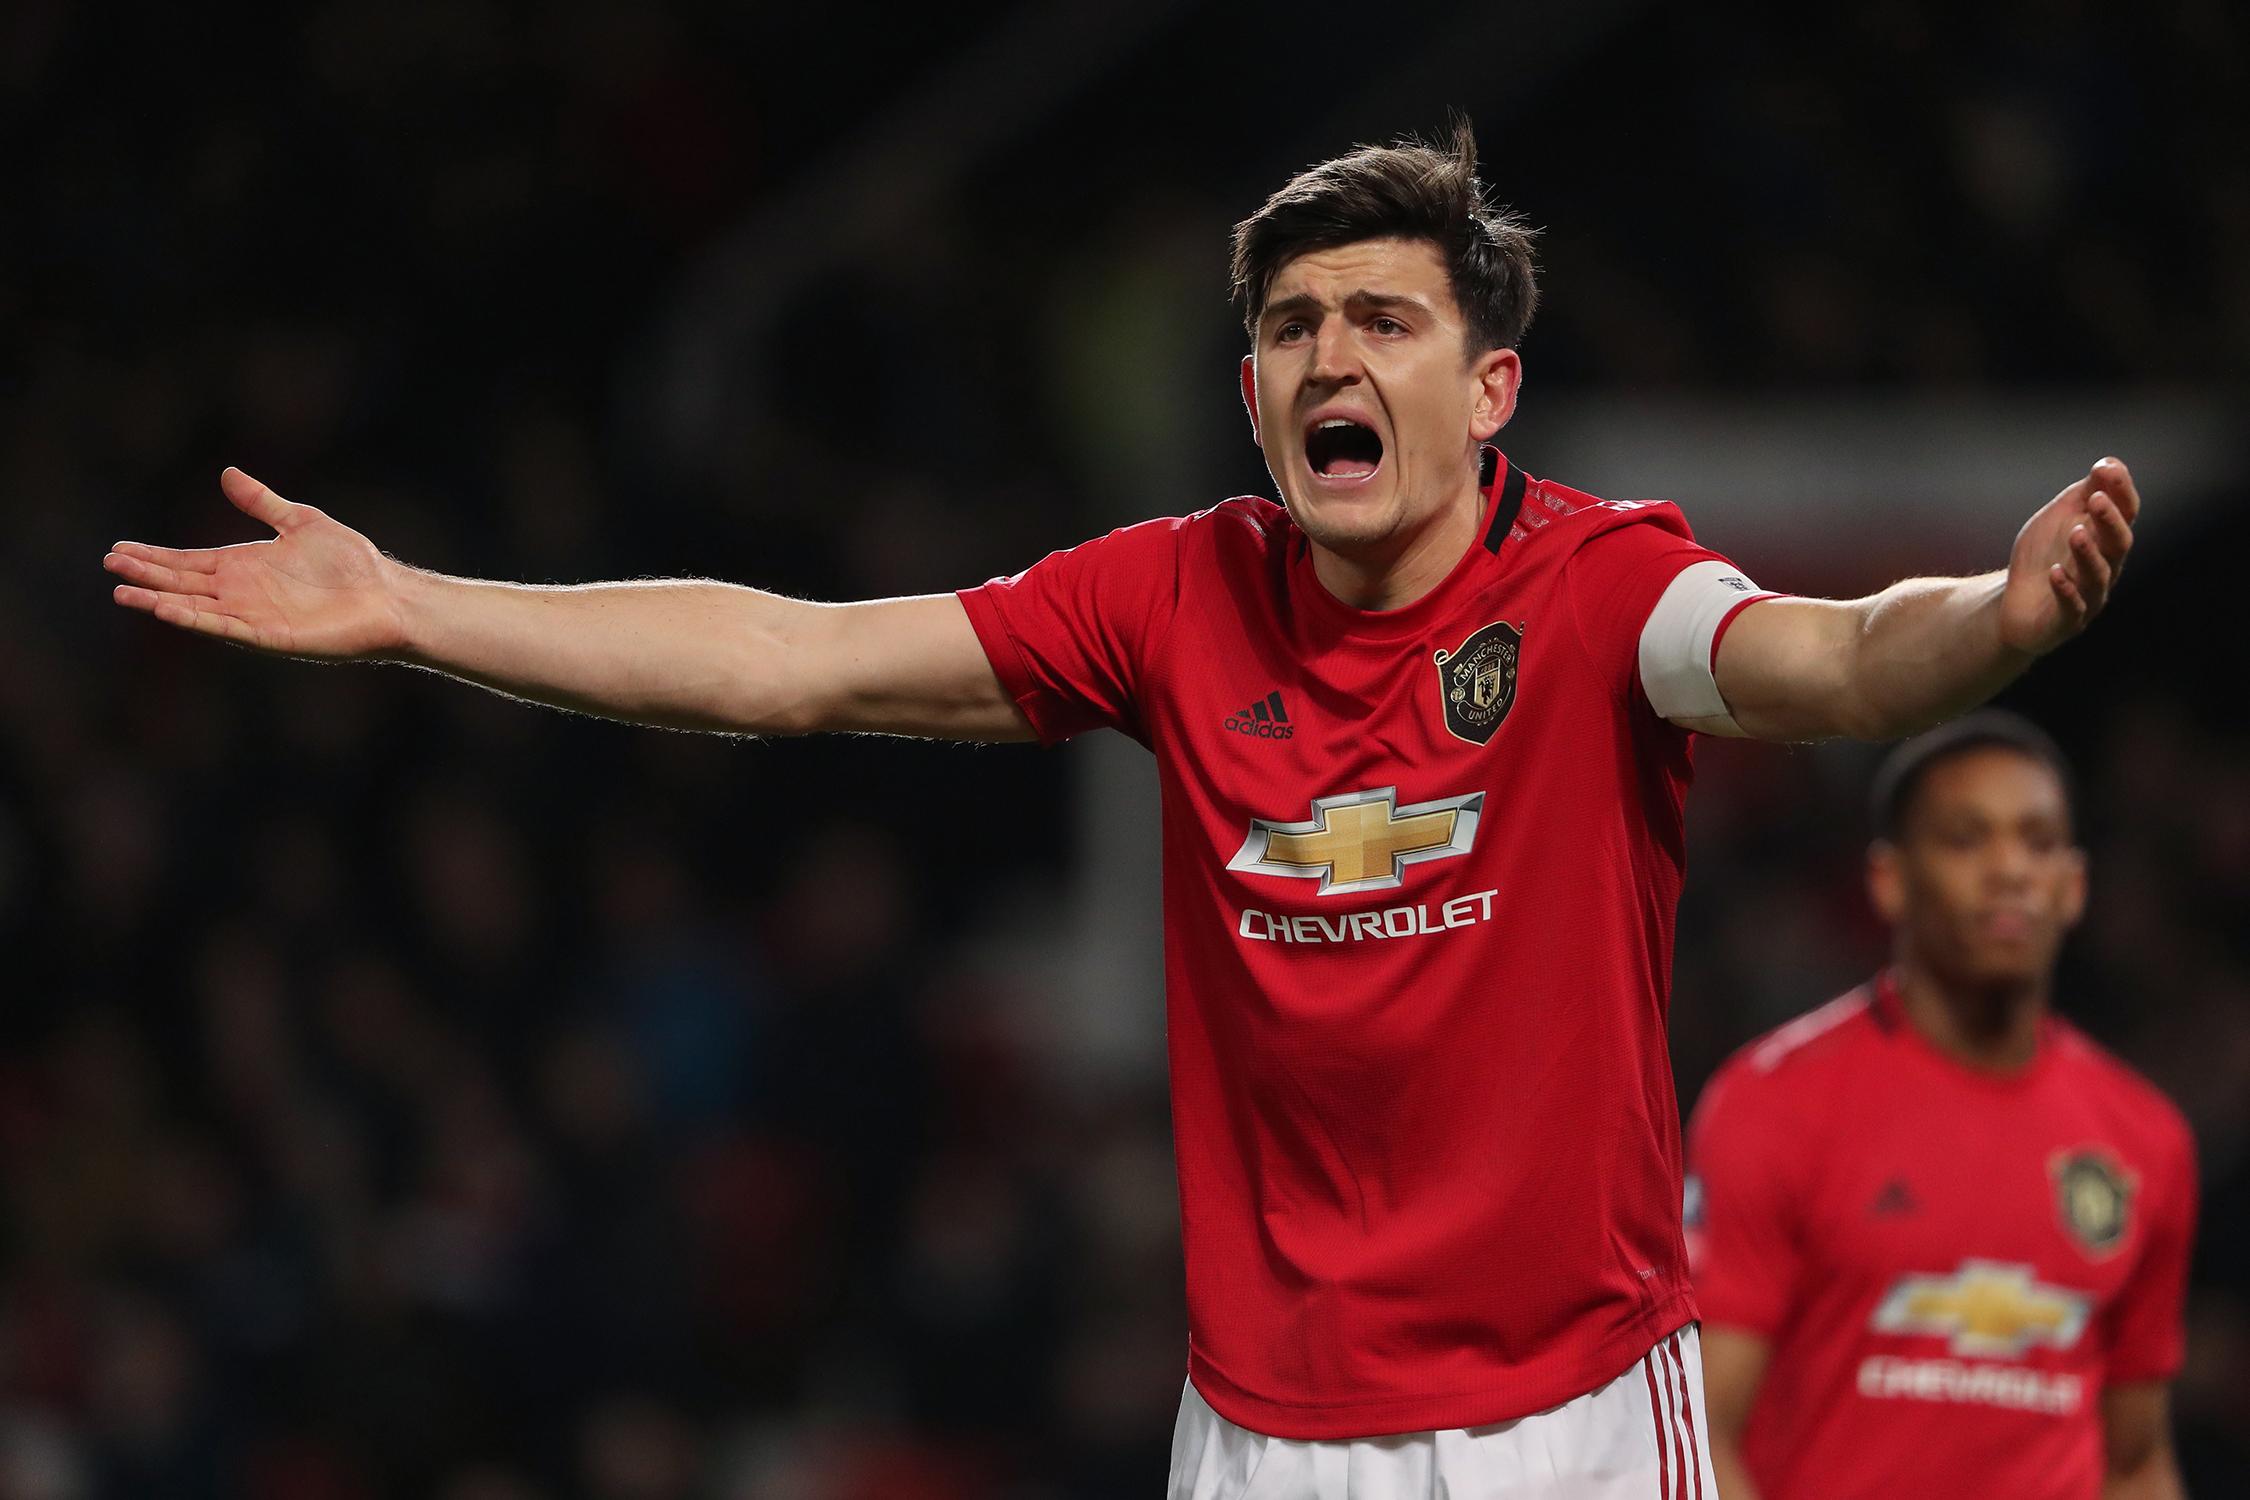 Harry Maguire to leave United, Manchester United, Harry Maguire contract, Harry Maguire transfer, Old Trafford, Premier League, Maguire departure 